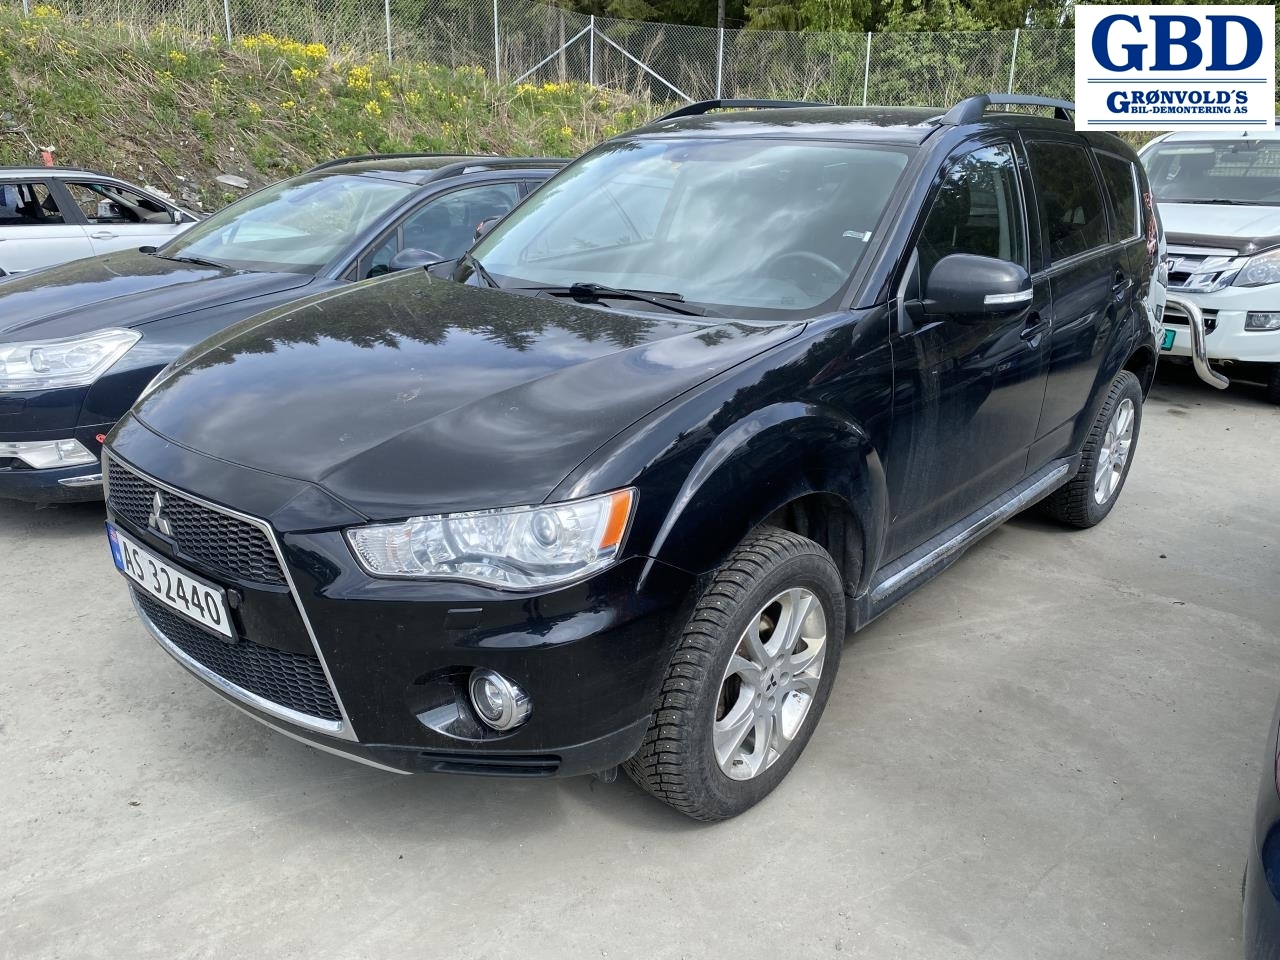 Mitsubishi Outlander, 2010-2012 (Type II, Fase 2) parts car, Engine code: 4B11, Gearbox code: 2700A262